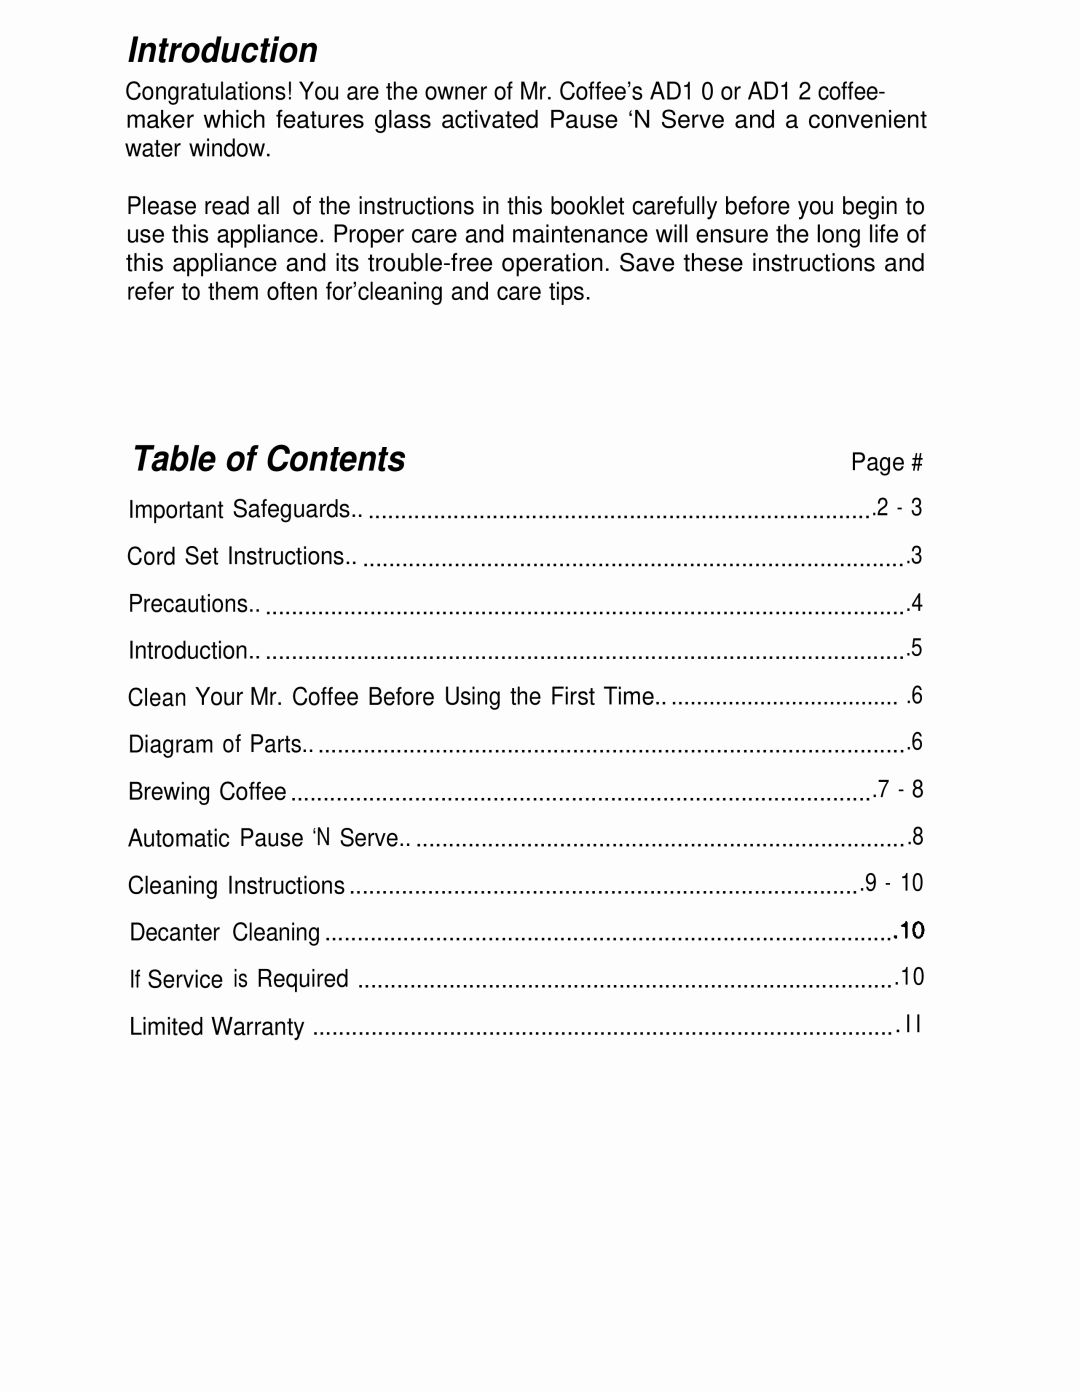 Mr. Coffee AD10 AND AD12 manual Introduction, Table of Contents 